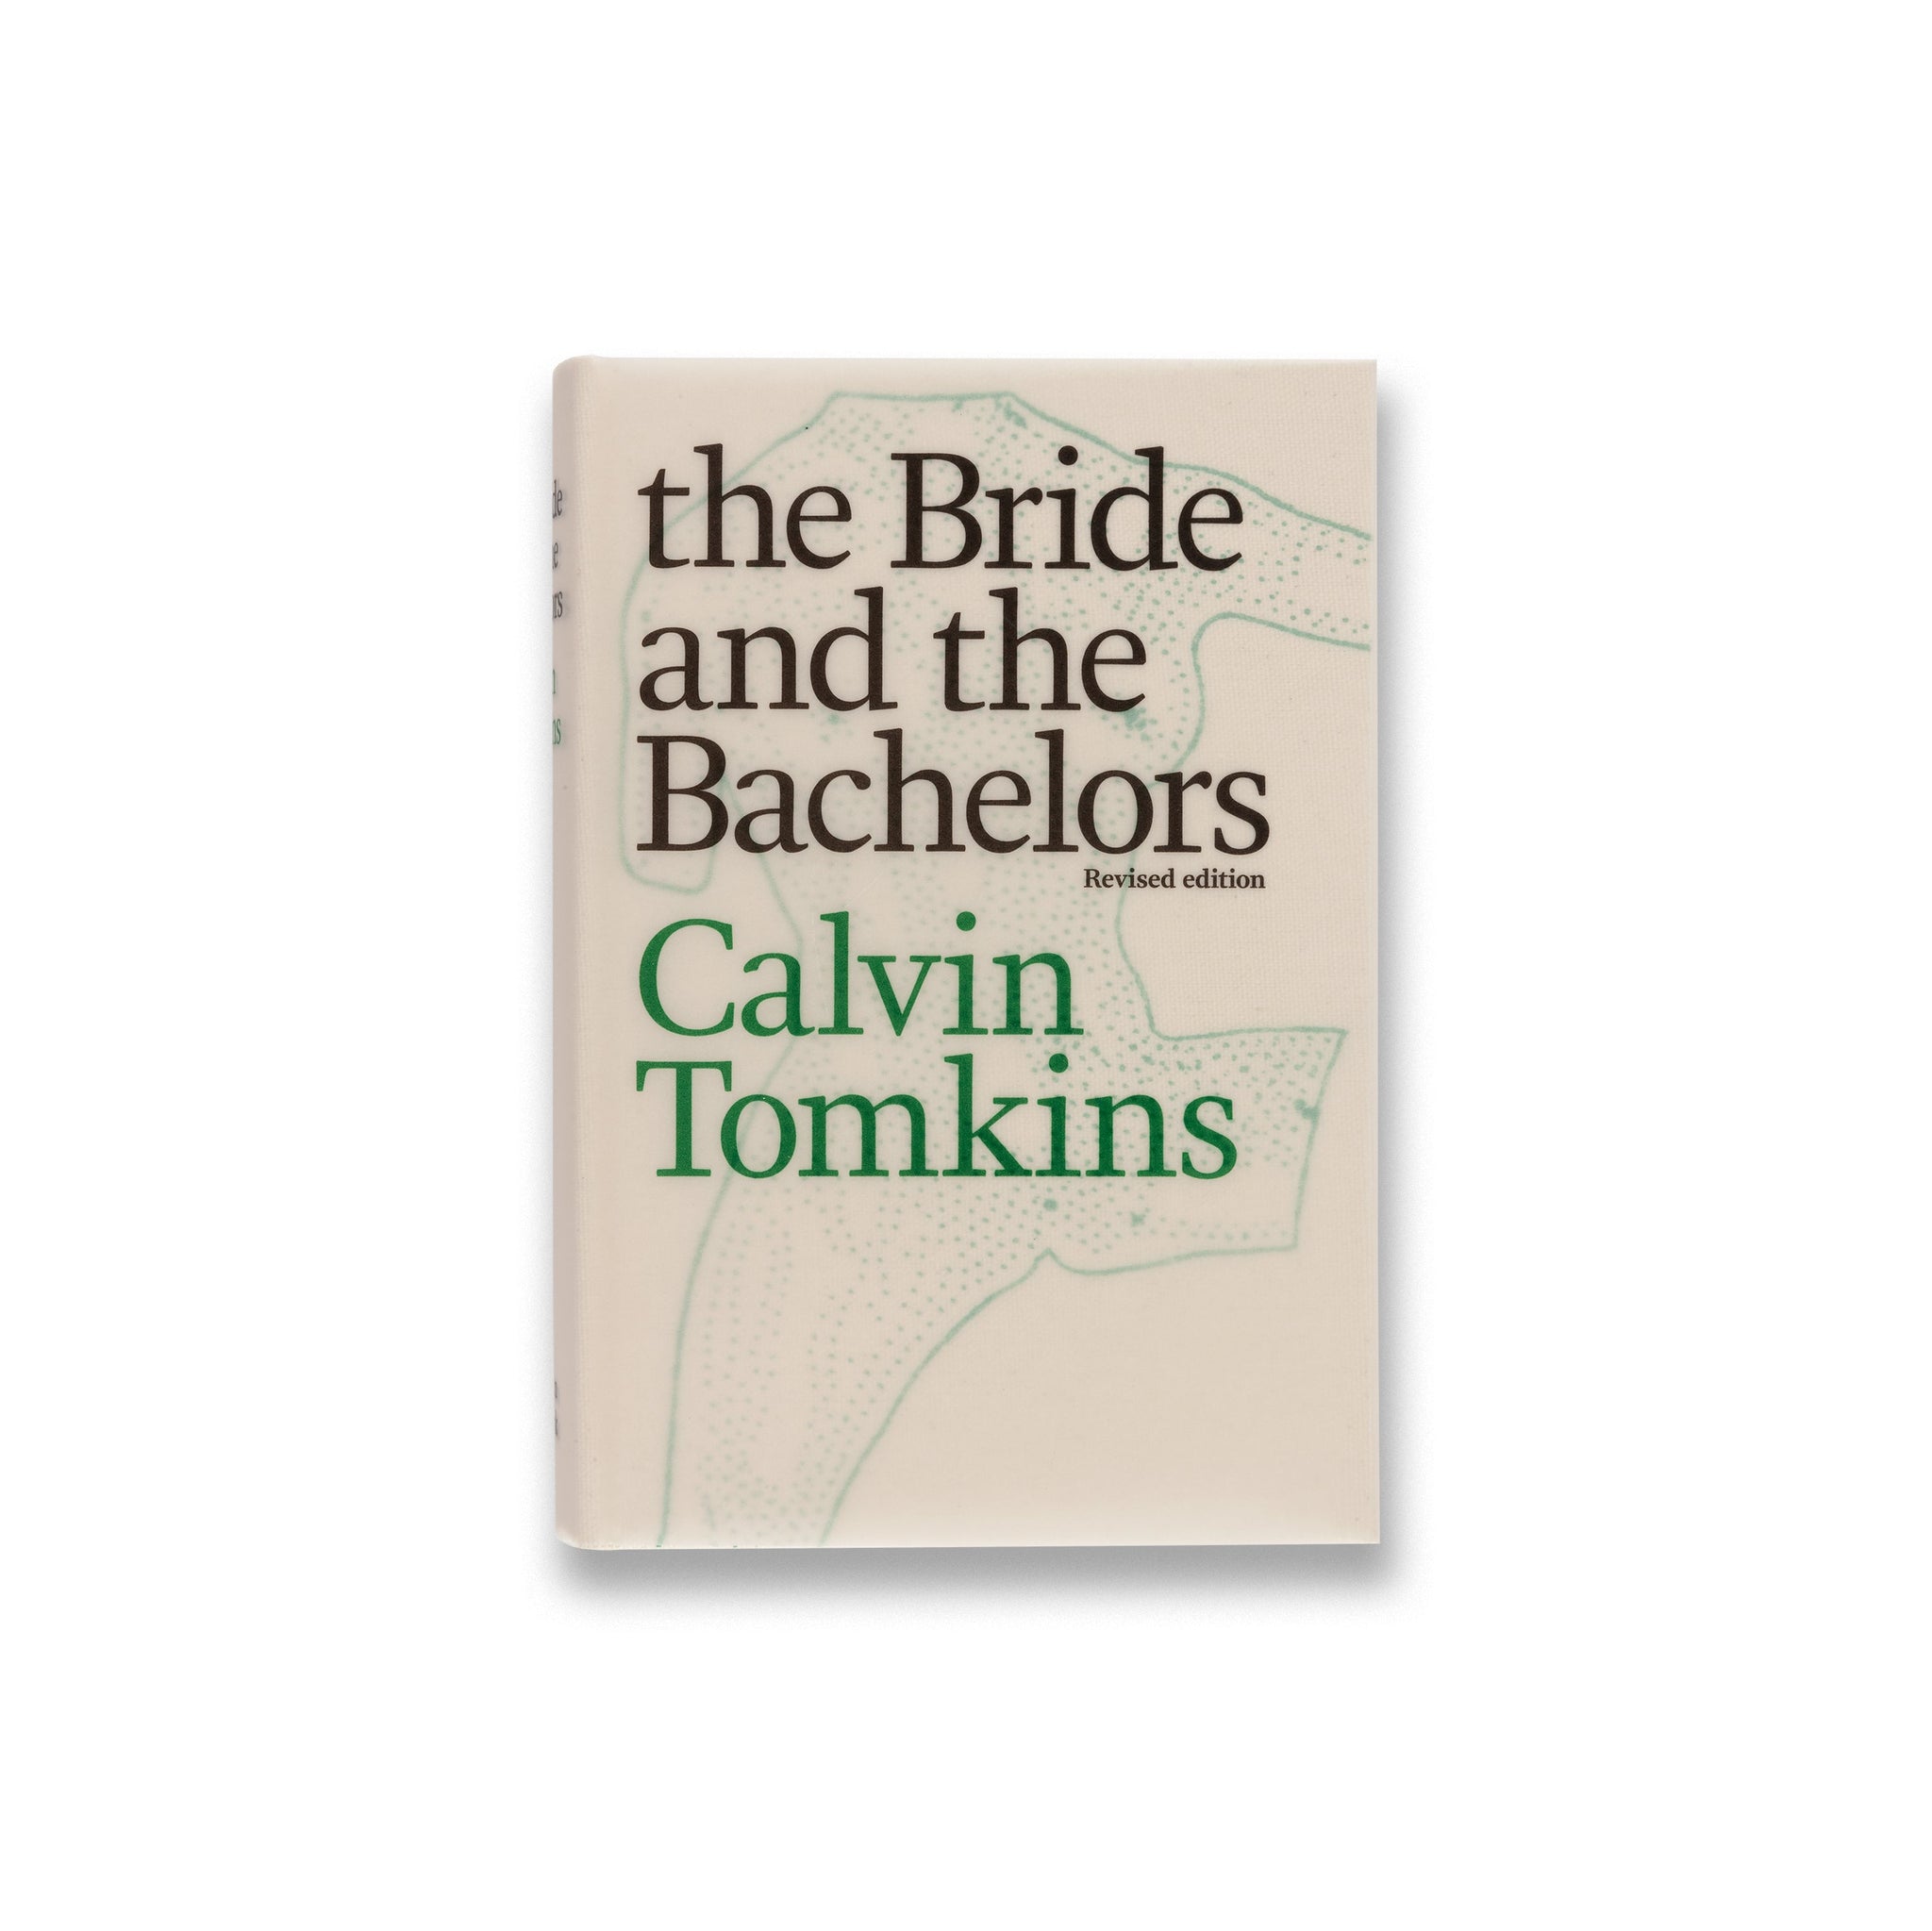 Cover of the book Calvin Tomkins: The Bride and the Bachelors with dust jacket 